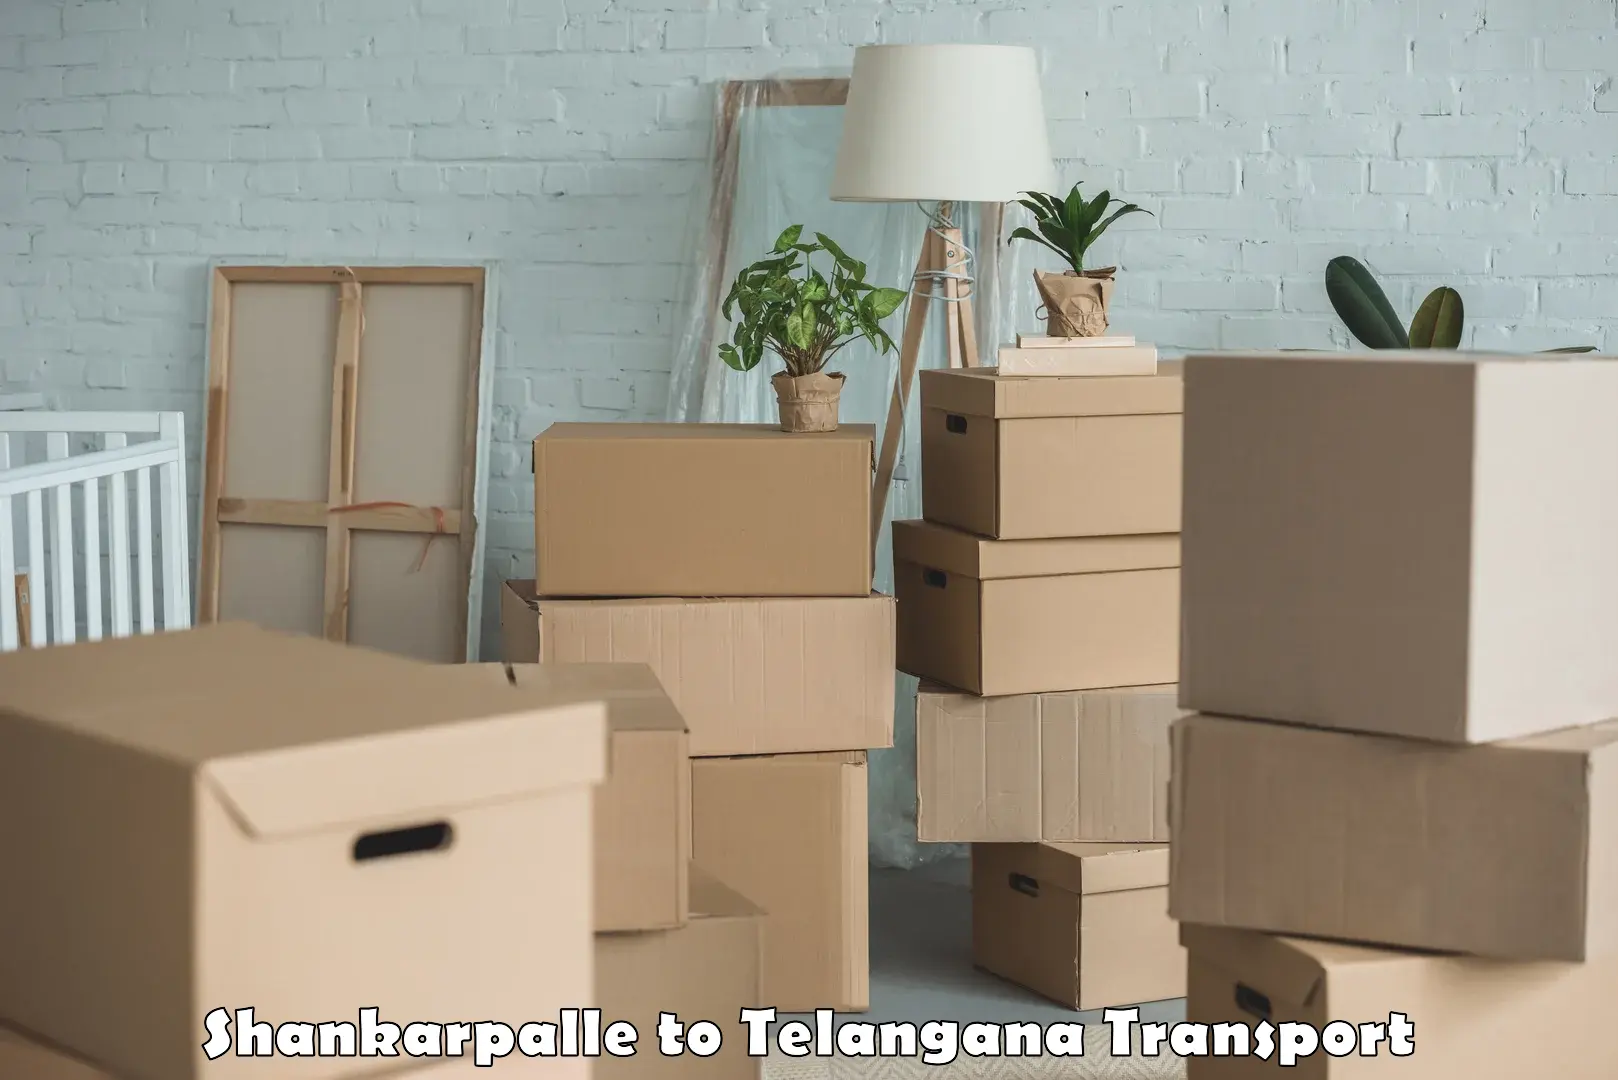 Luggage transport services Shankarpalle to Hyderabad